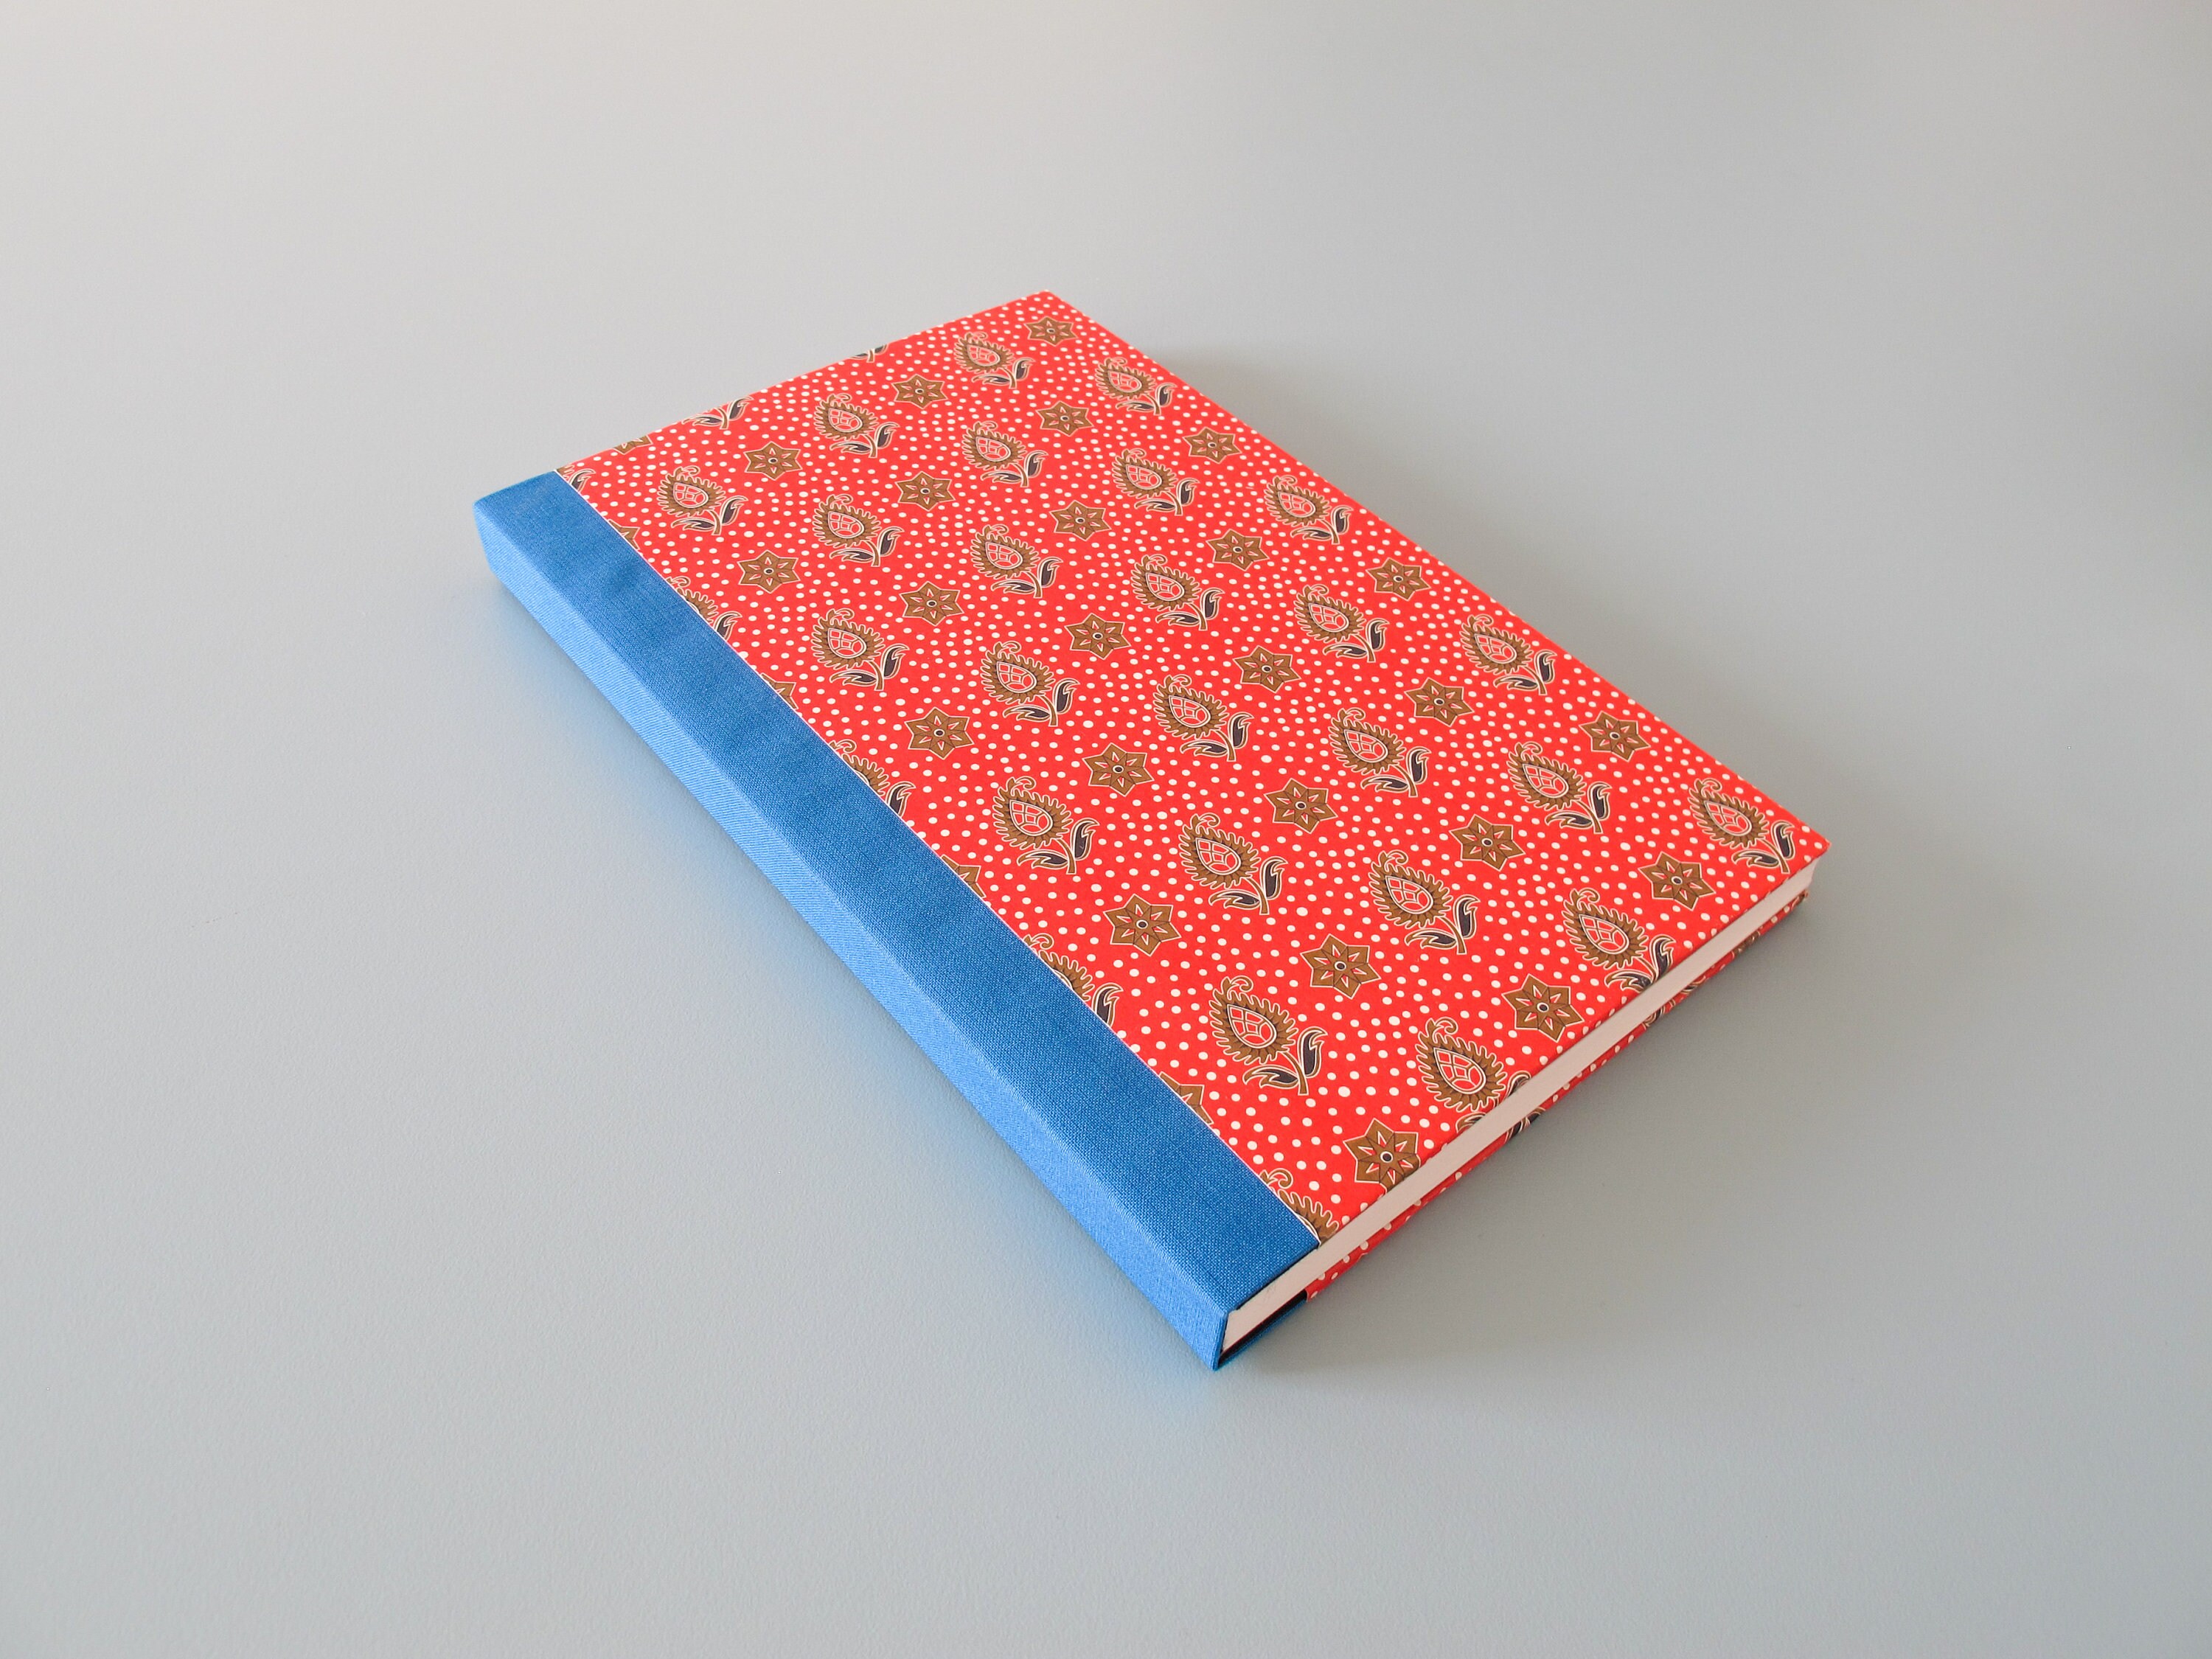 Hardcover Sewn Board Binding A5 Sketchbook 100 Gsm Fedrigoni Arcoprint  Dotted Paper Bookcloth Cover 